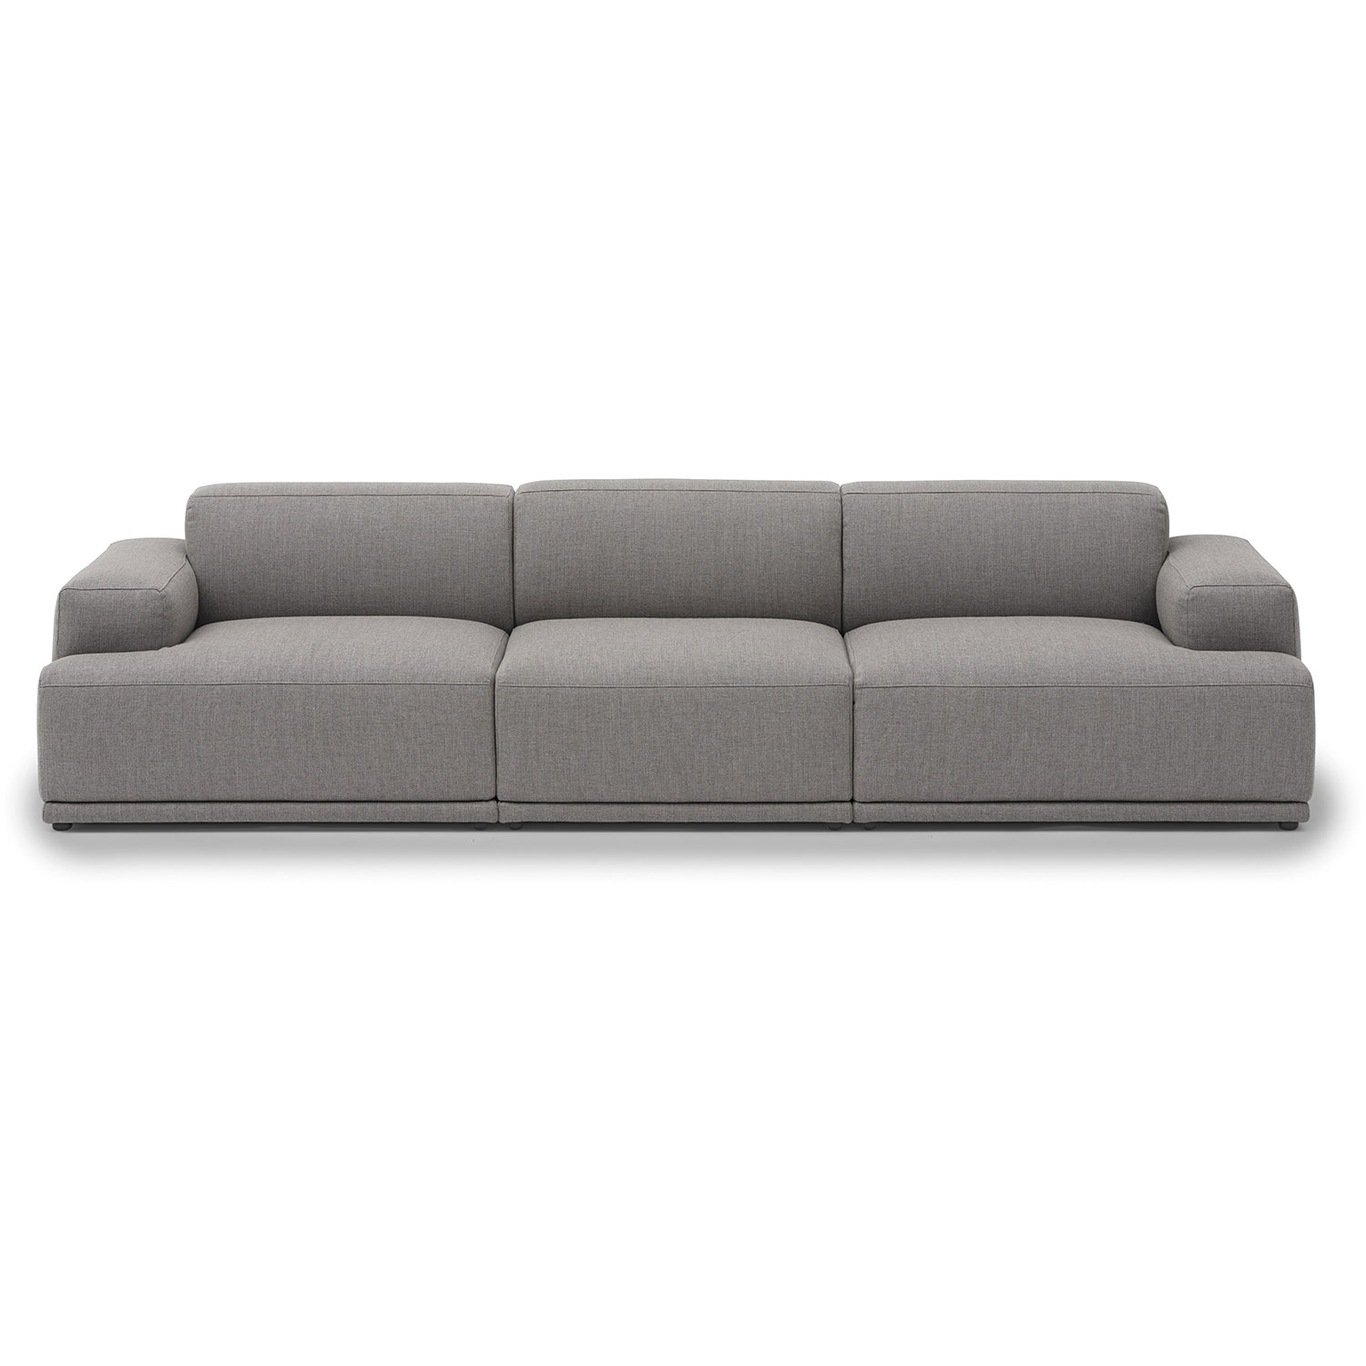 Connect Soft Soffa 3-Sits Config 1, Re-Wool 128